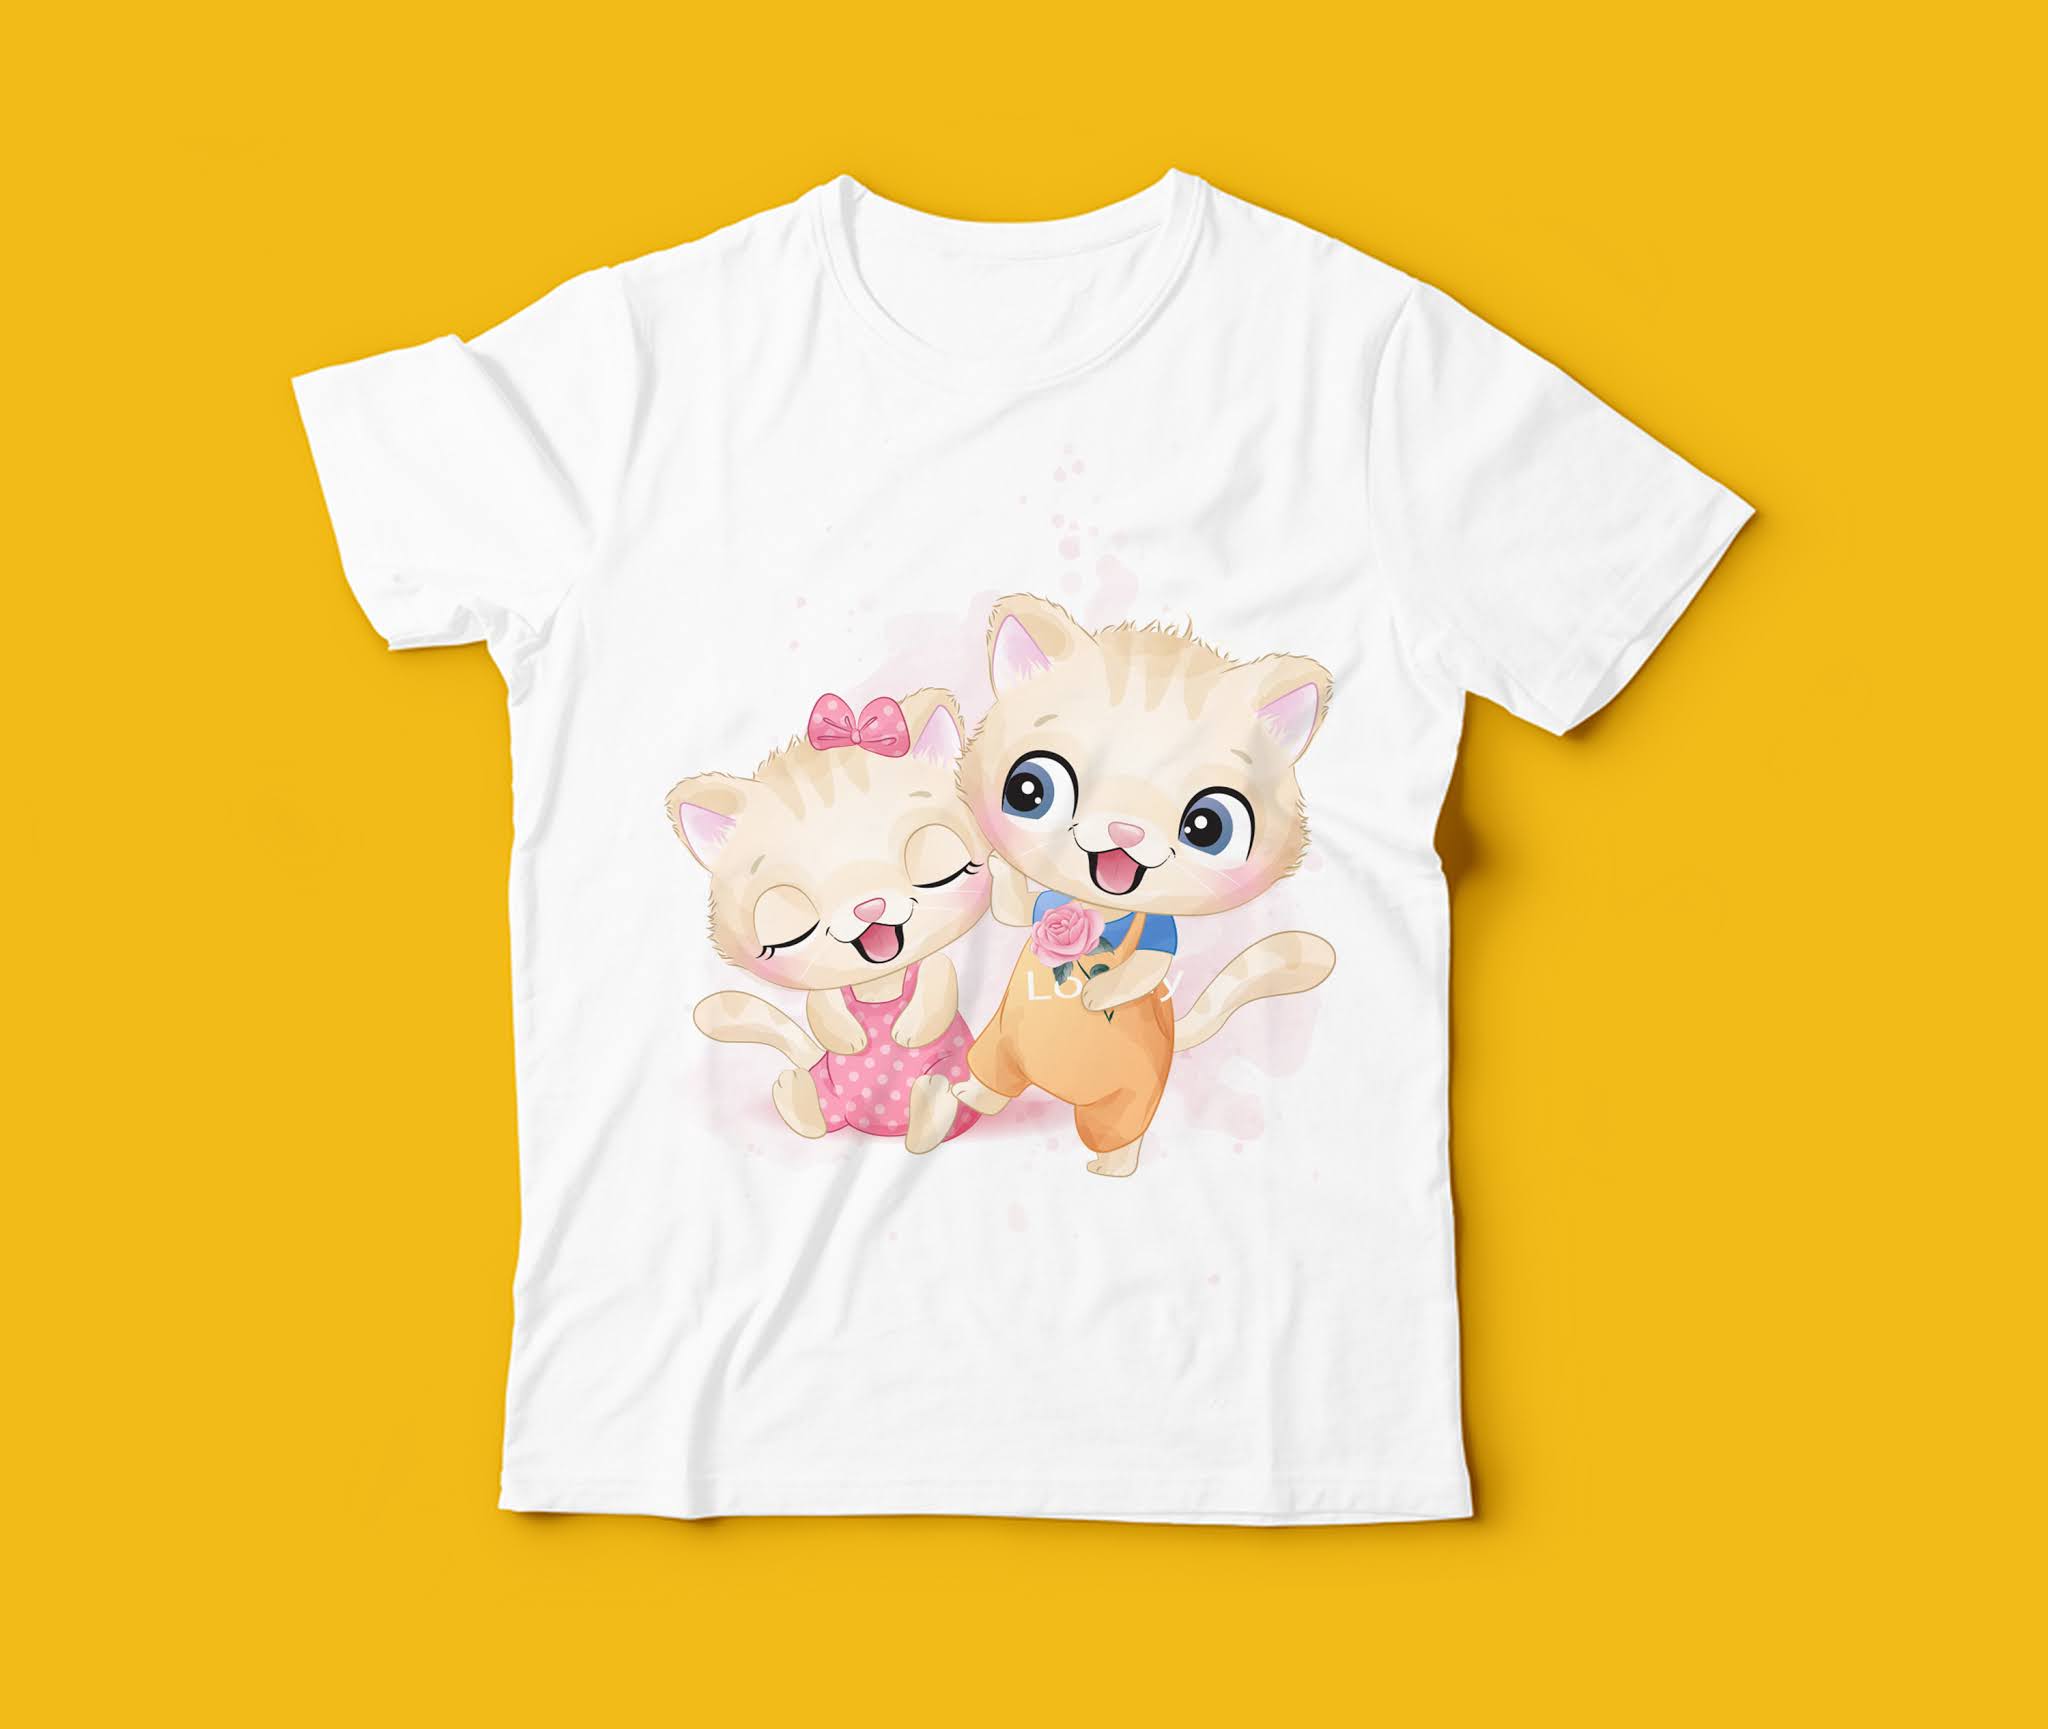 Vector designs of the highest quality for printing on kids' t-shirts, gorgeous 3D cartoon shapes